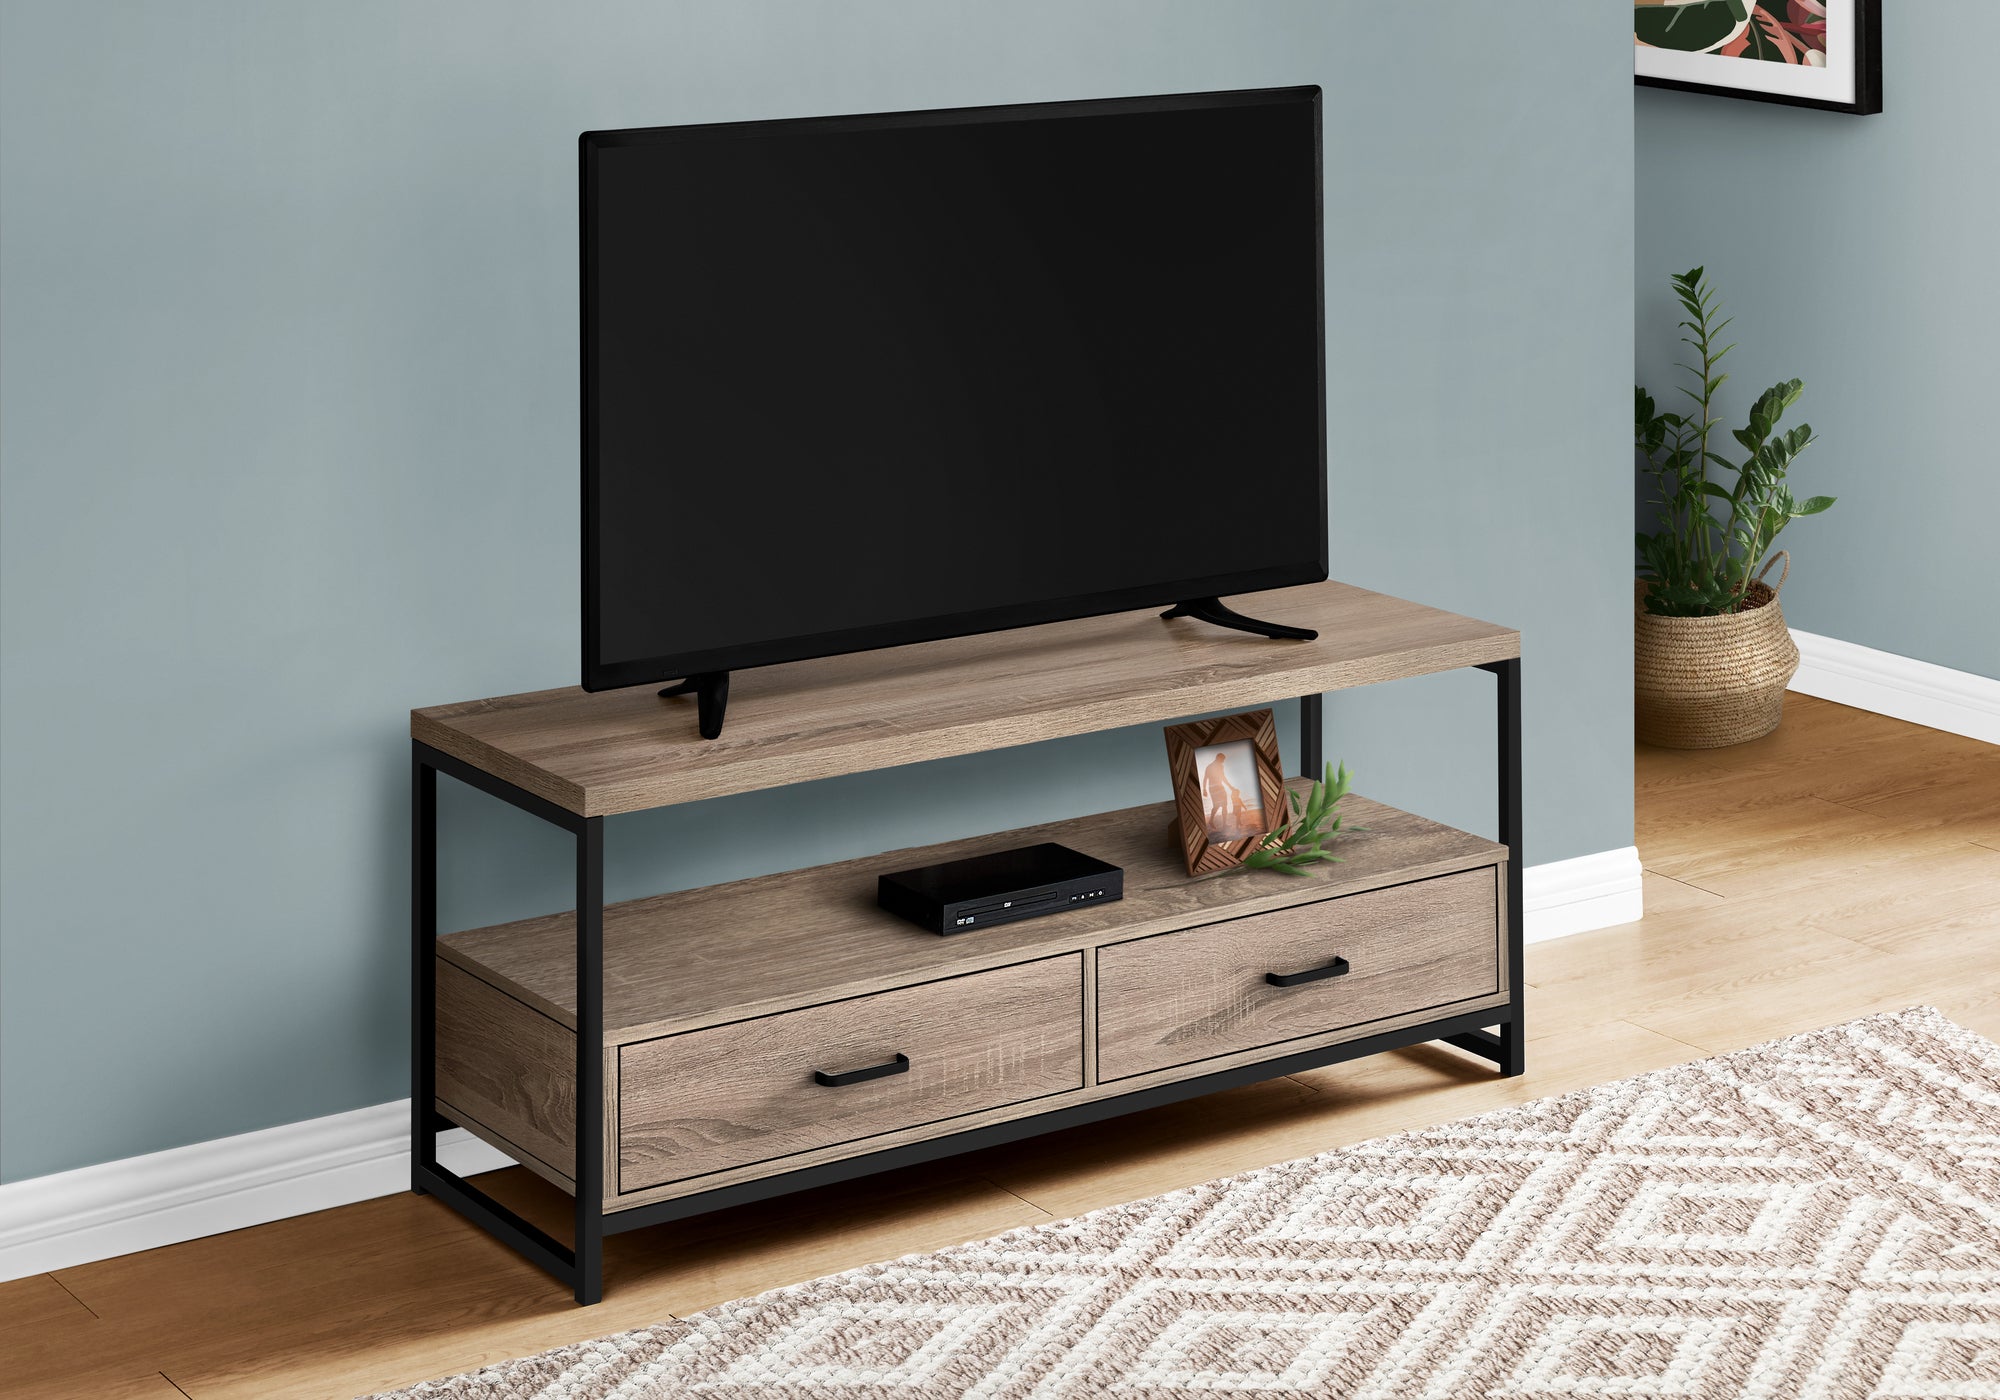 I 2872 - TV STAND - 48"L / DARK TAUPE / BLACK METAL BY MONARCH SPECIALTIES INC